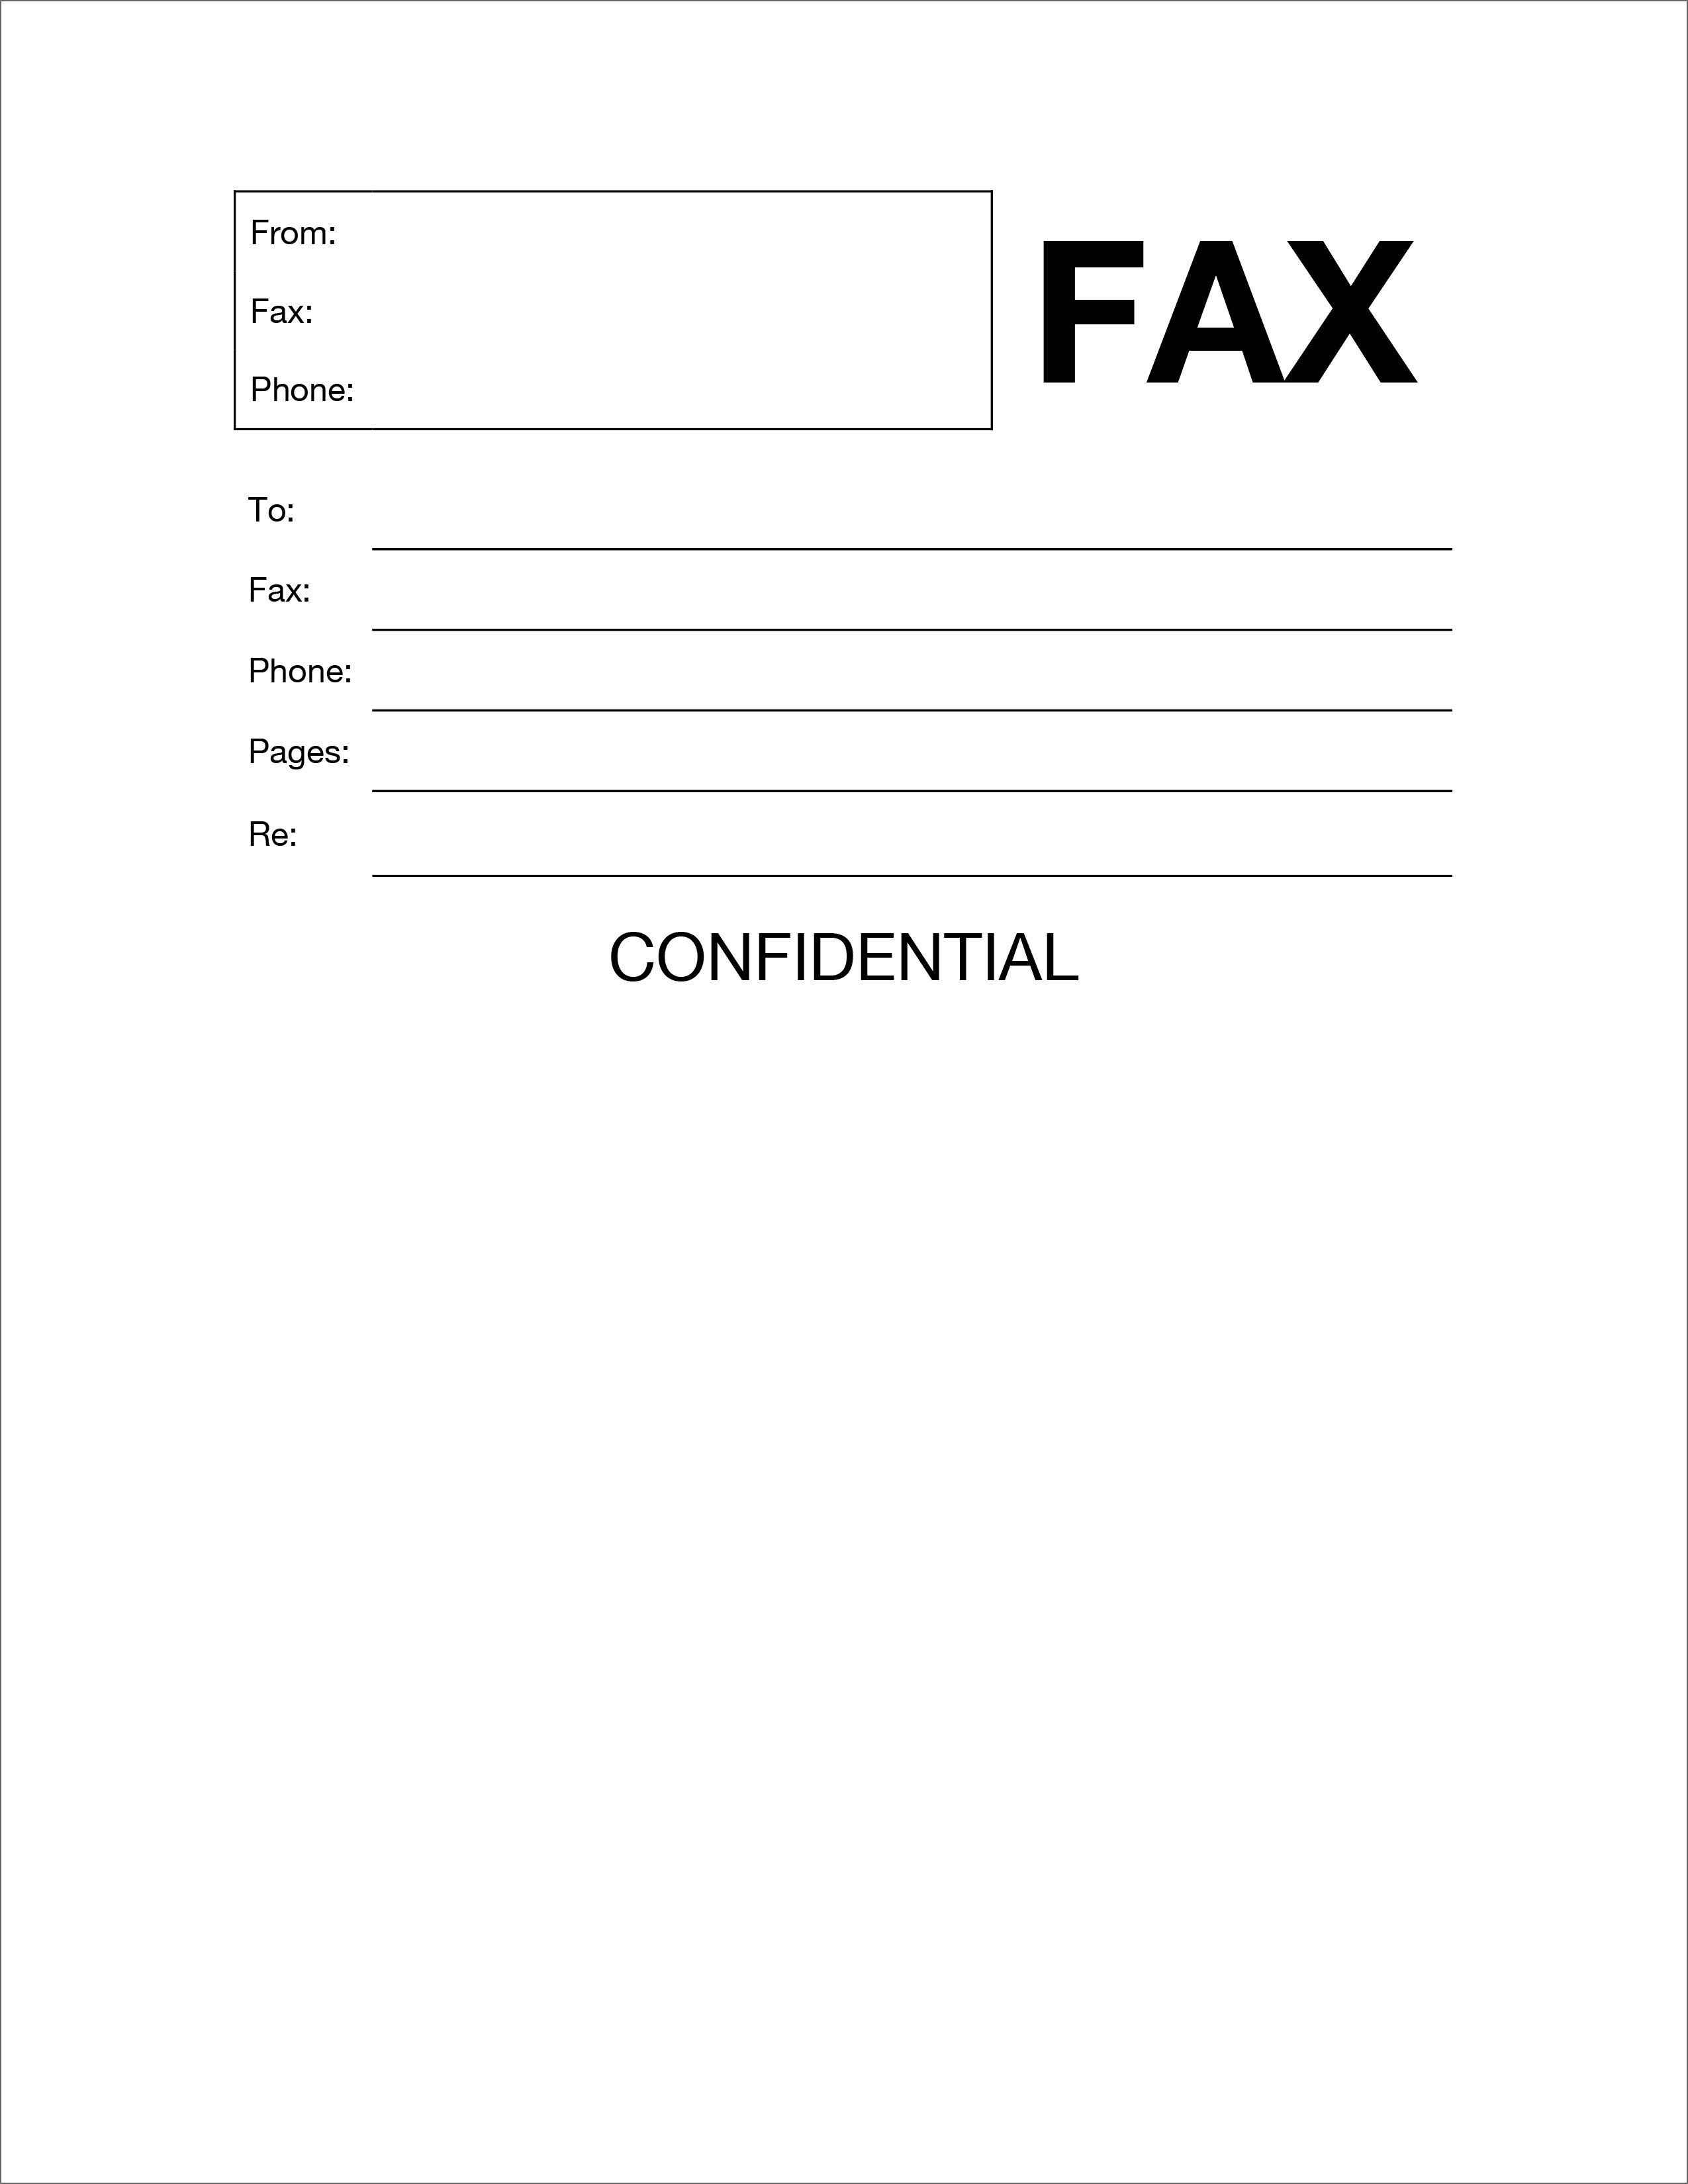 20 Free Fax Cover Templates Sheets In Microsoft fice DocX